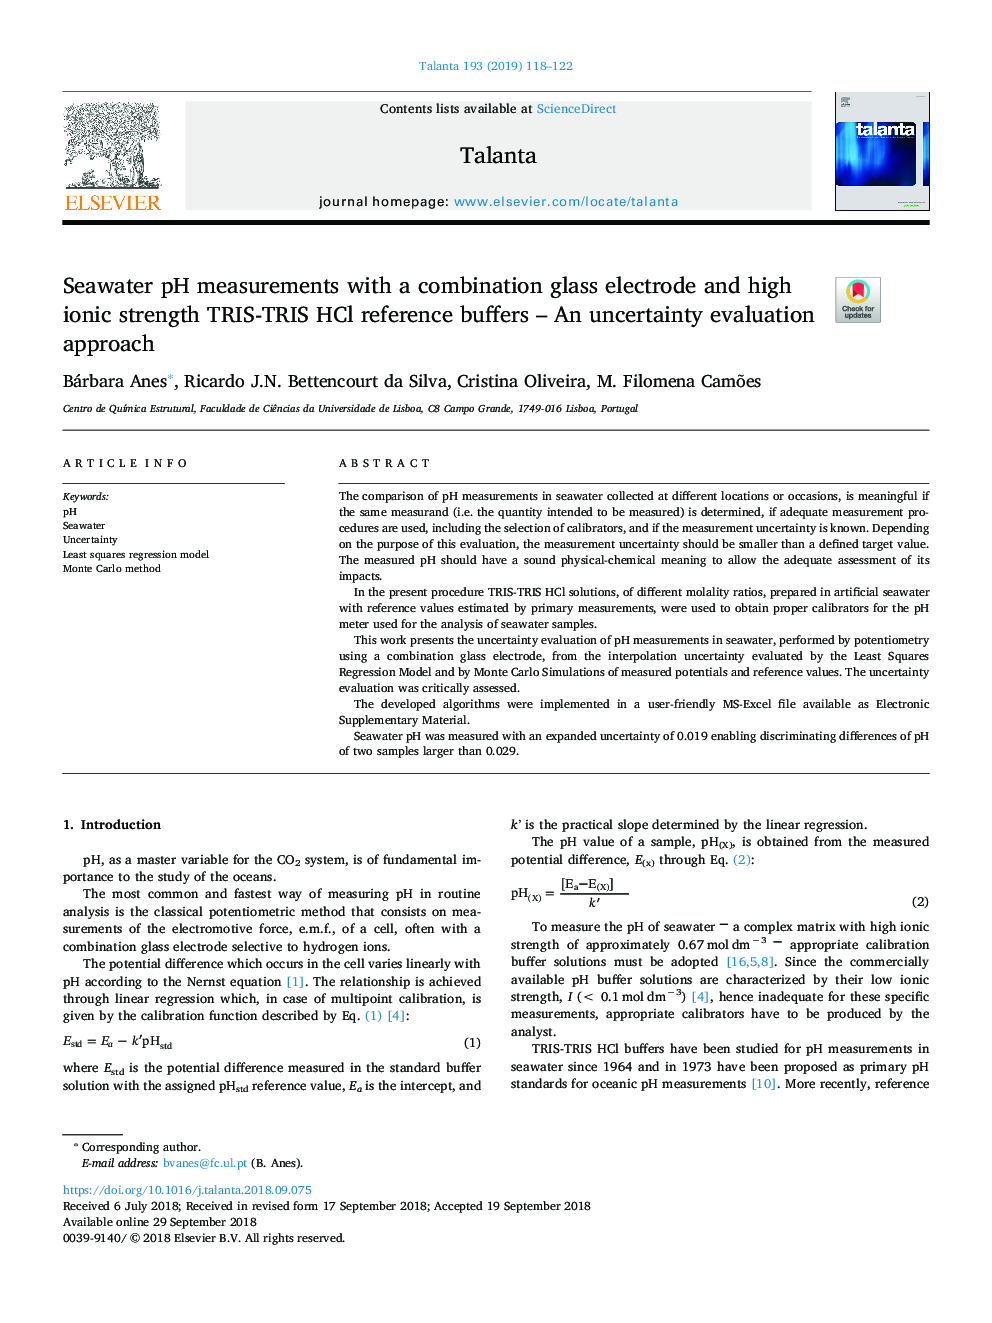 Seawater pH measurements with a combination glass electrode and high ionic strength TRIS-TRIS HCl reference buffers - An uncertainty evaluation approach